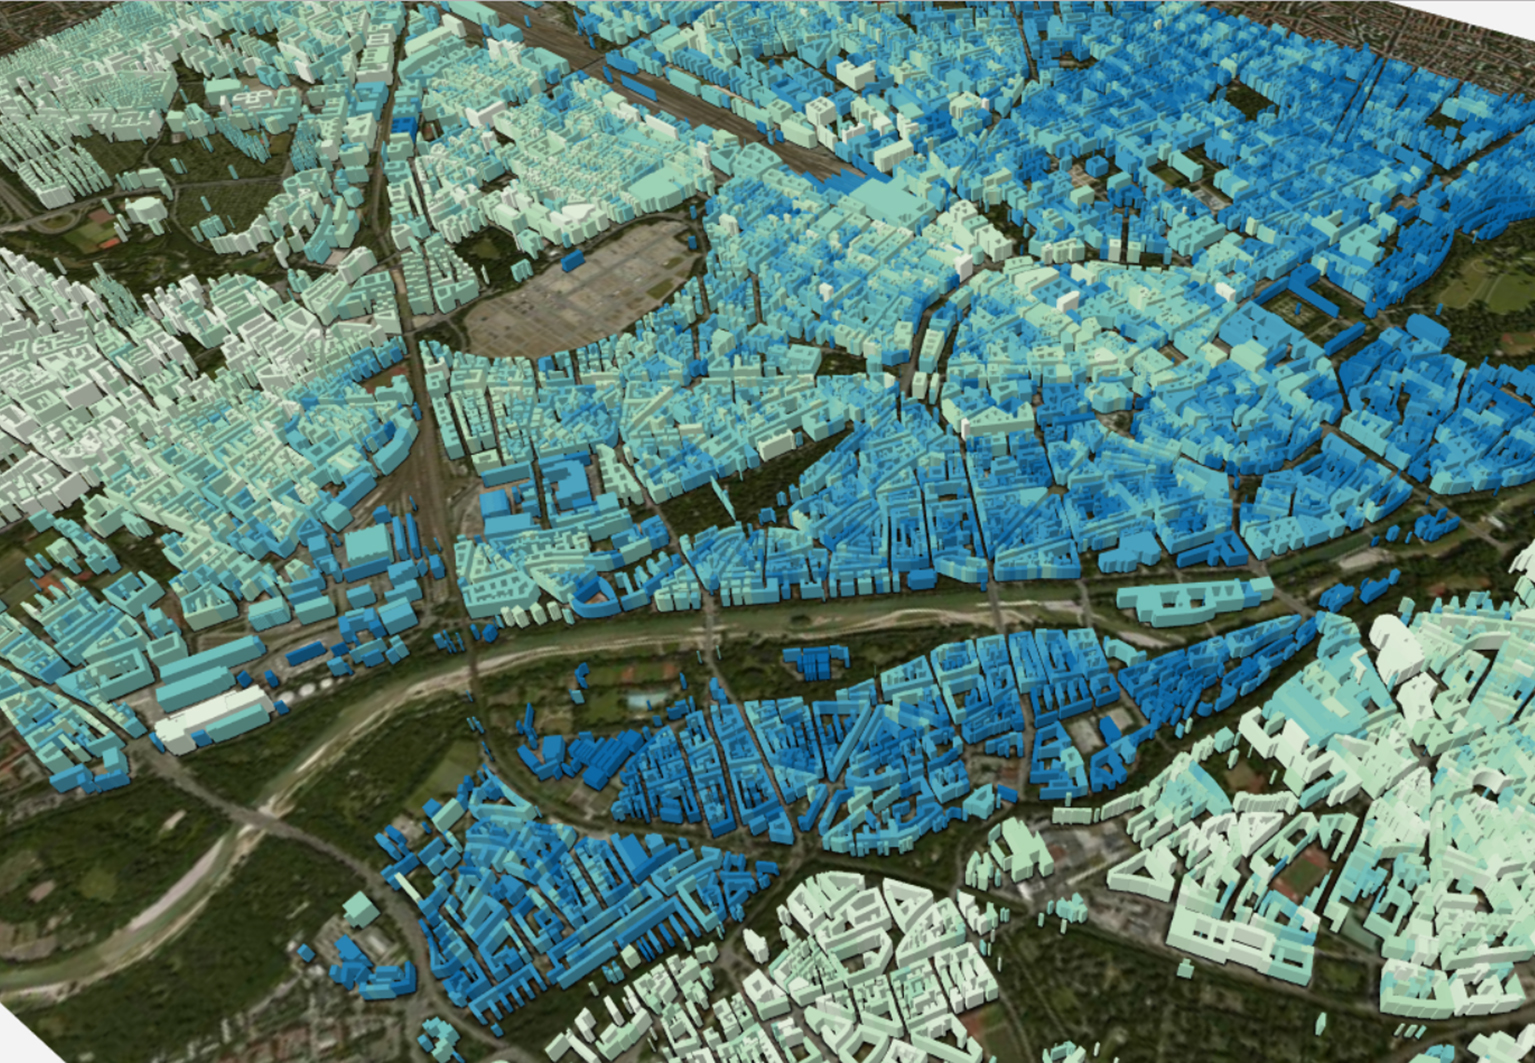 This image shows a section of a global 3D model of urban areas and was generated primarily using TanDEM-X Satellite data. To create this model for all cities in the world, sophisticated AI procedures are used.